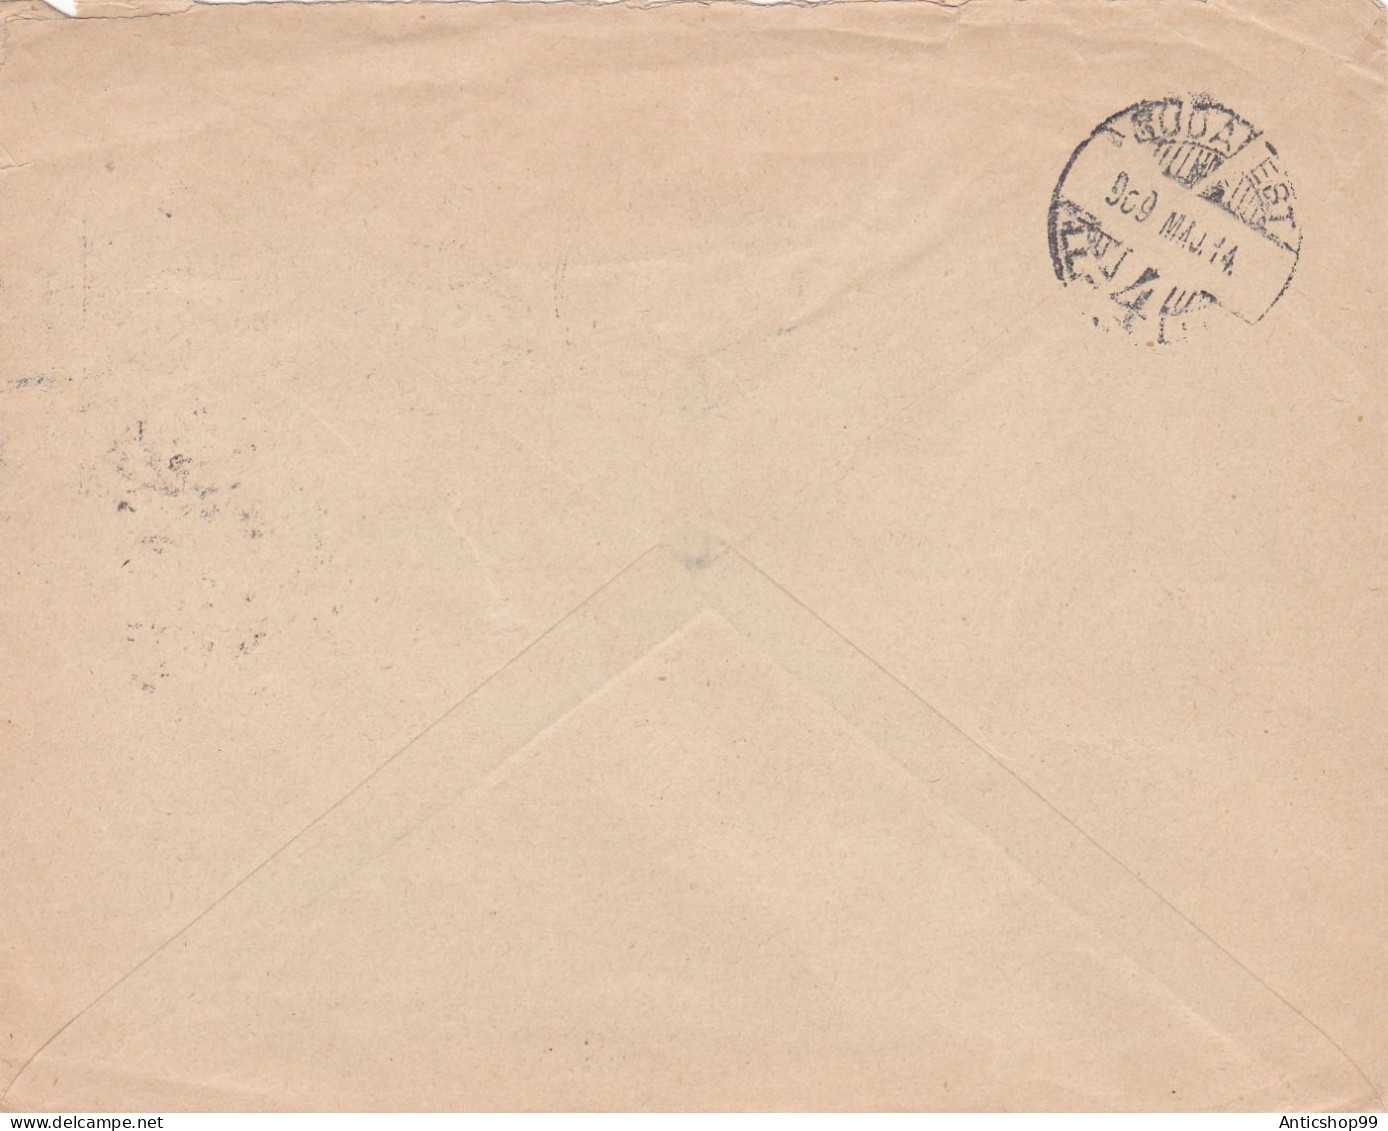 STAMPS ON COVER , SENT TO BUDAPEST,  USED, 1909, COVERS  AUSTRIA - Covers